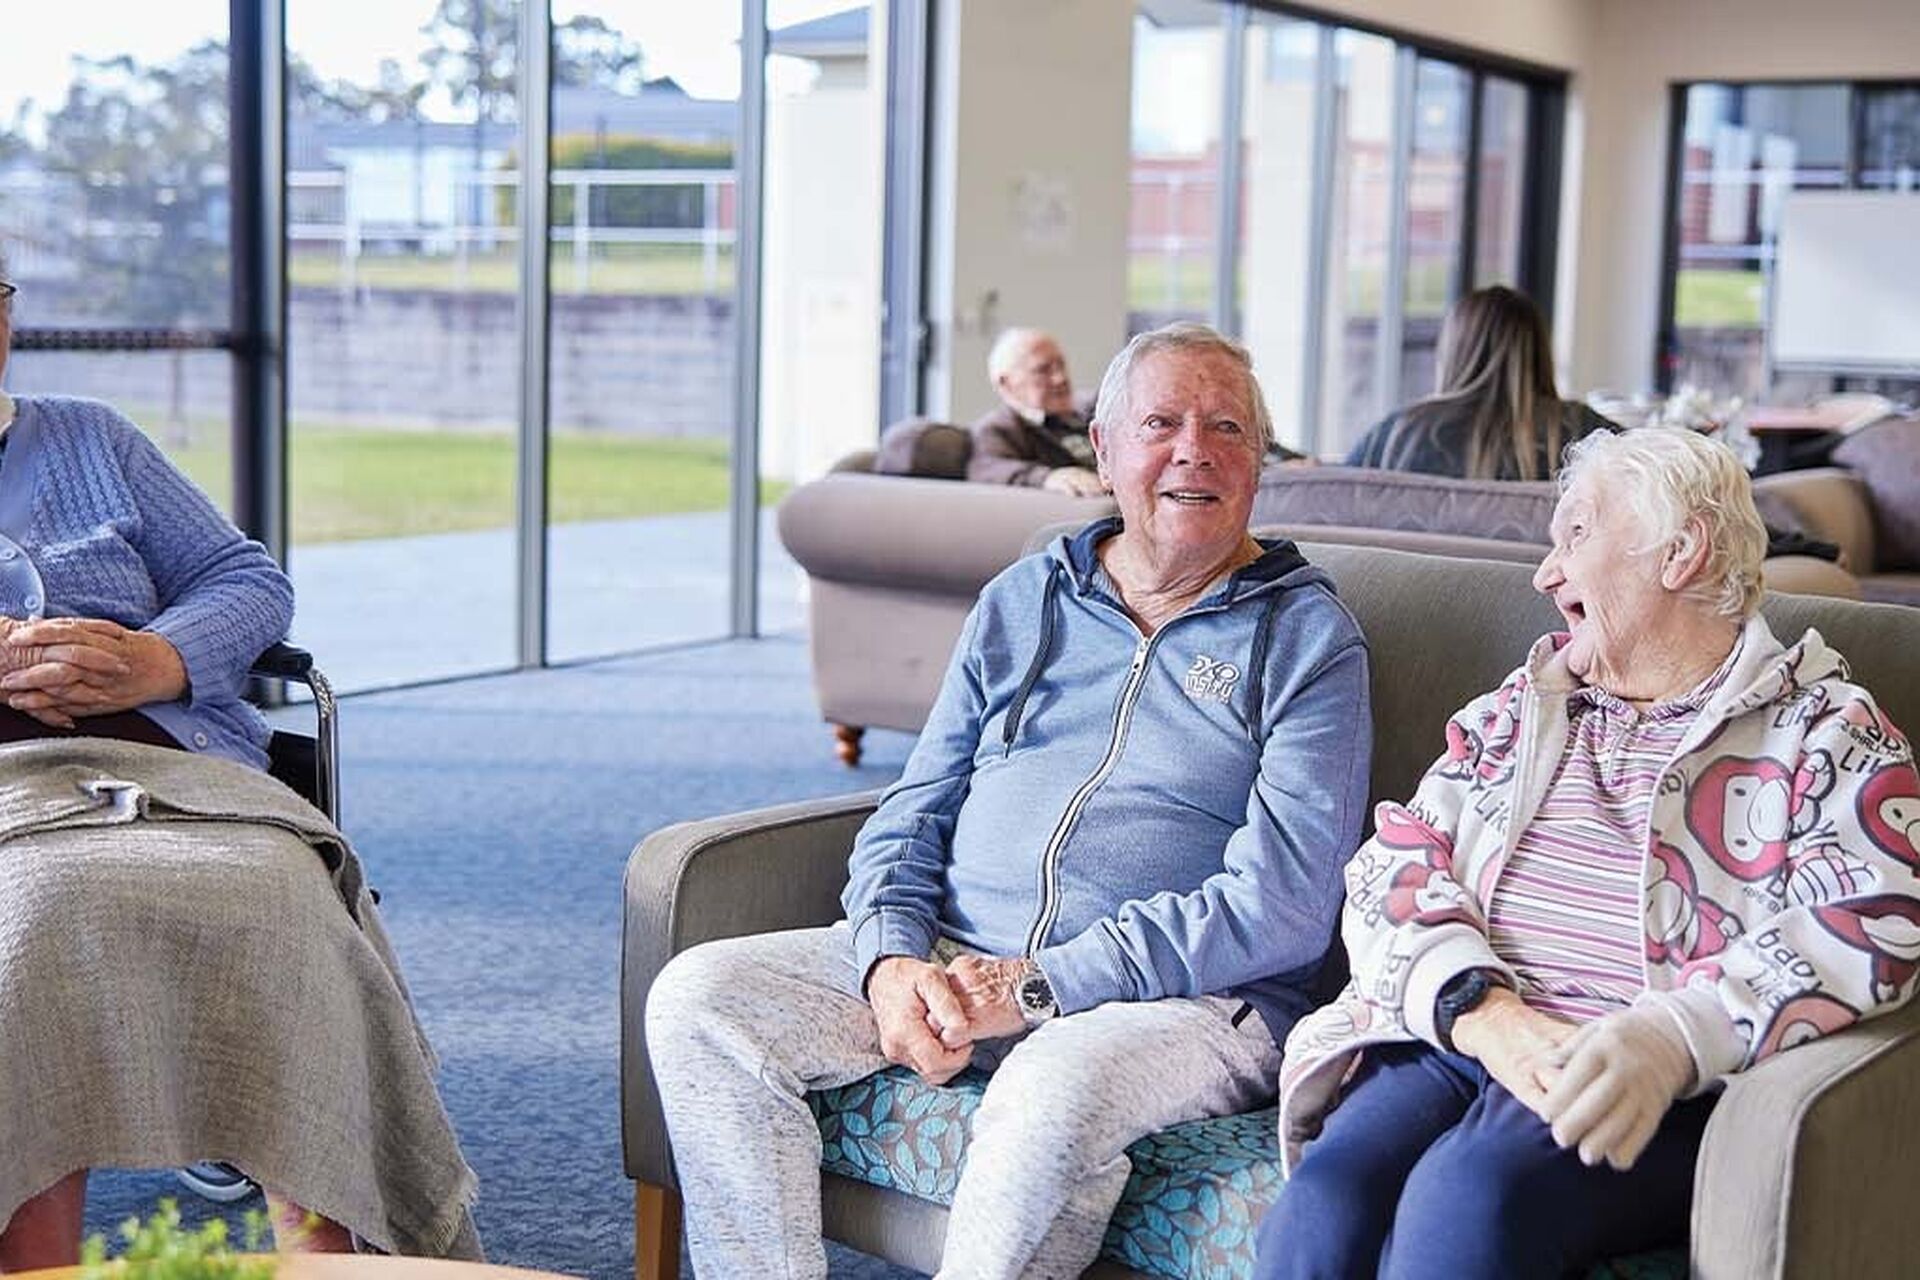 aged care residents enjoying socialising at baptistcare bethshan gardens centre aged care home in wyee nsw lake macquarie